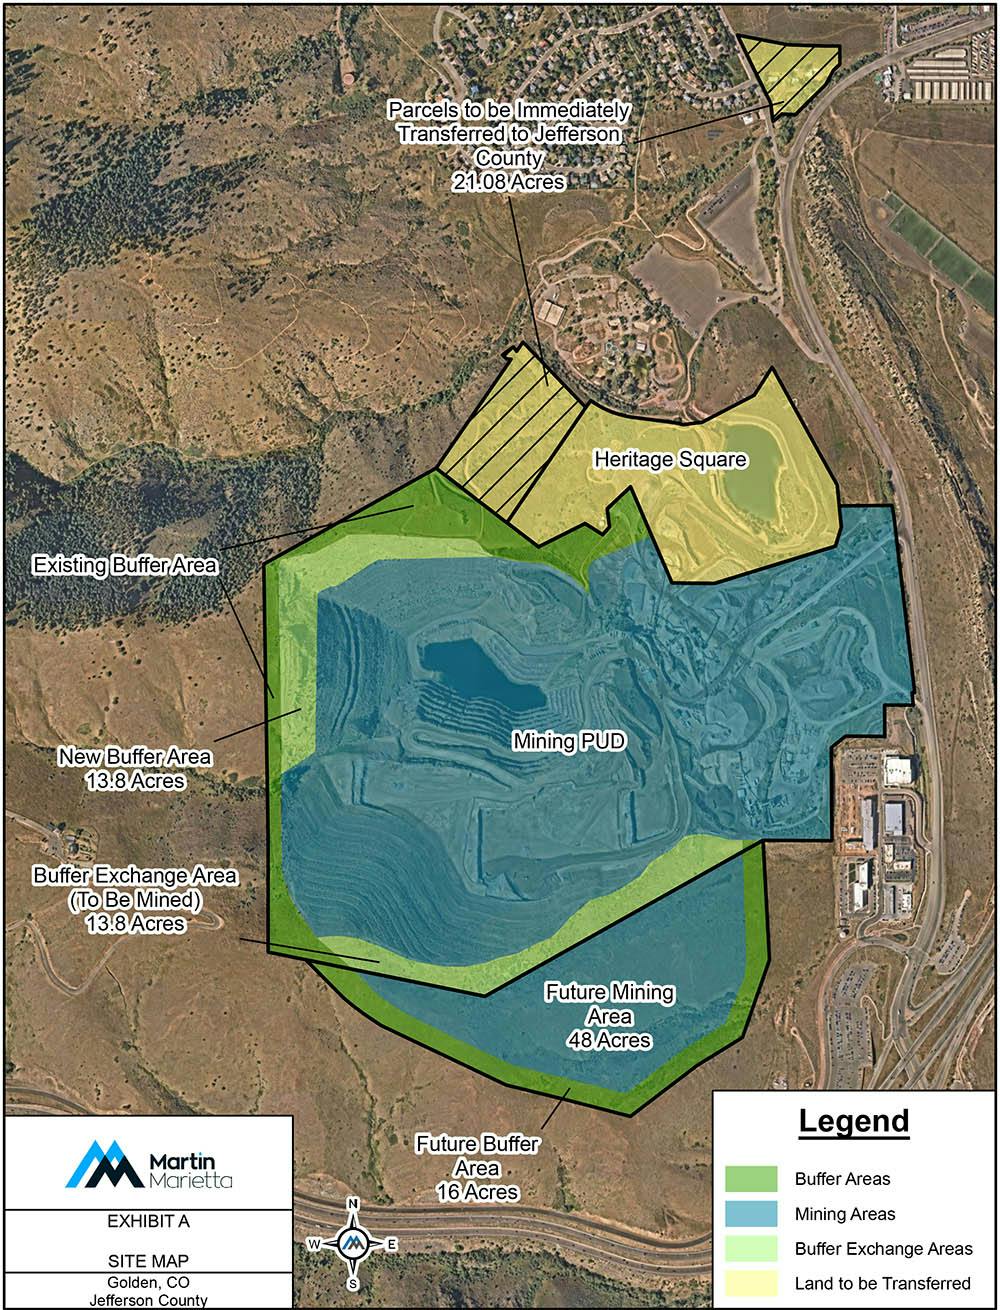 Map of Martin Marietta mine proposed expansion.